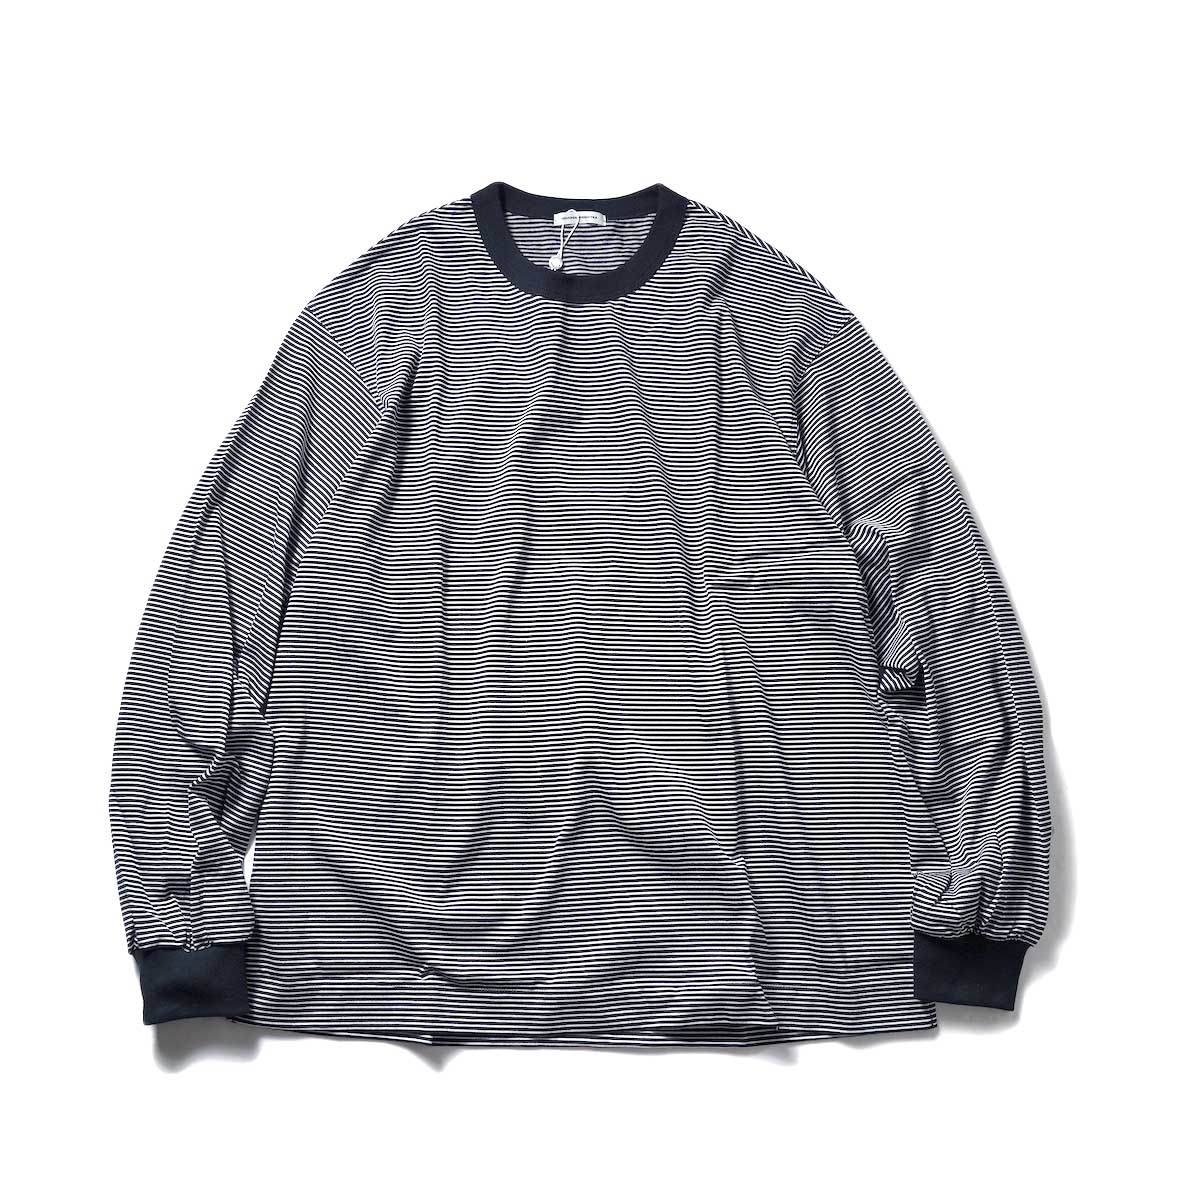 UNIVERSAL PRODUCTS / BORDER L/S T-SHIRT (Black)正面